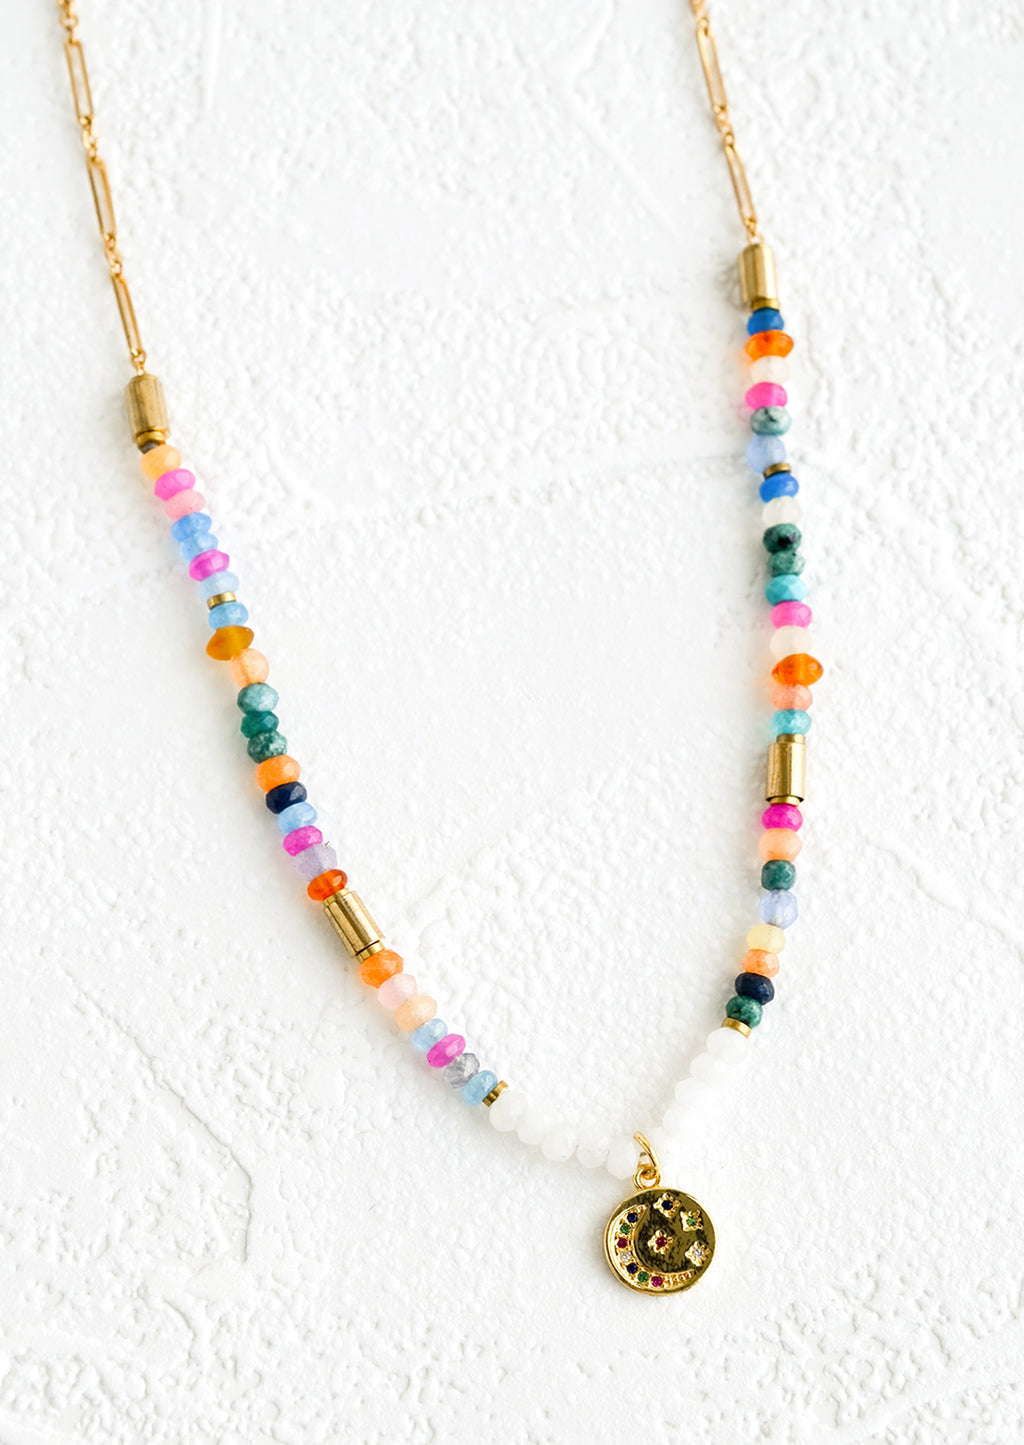 1: A necklace made of colorful rondelle beads with gold accents.